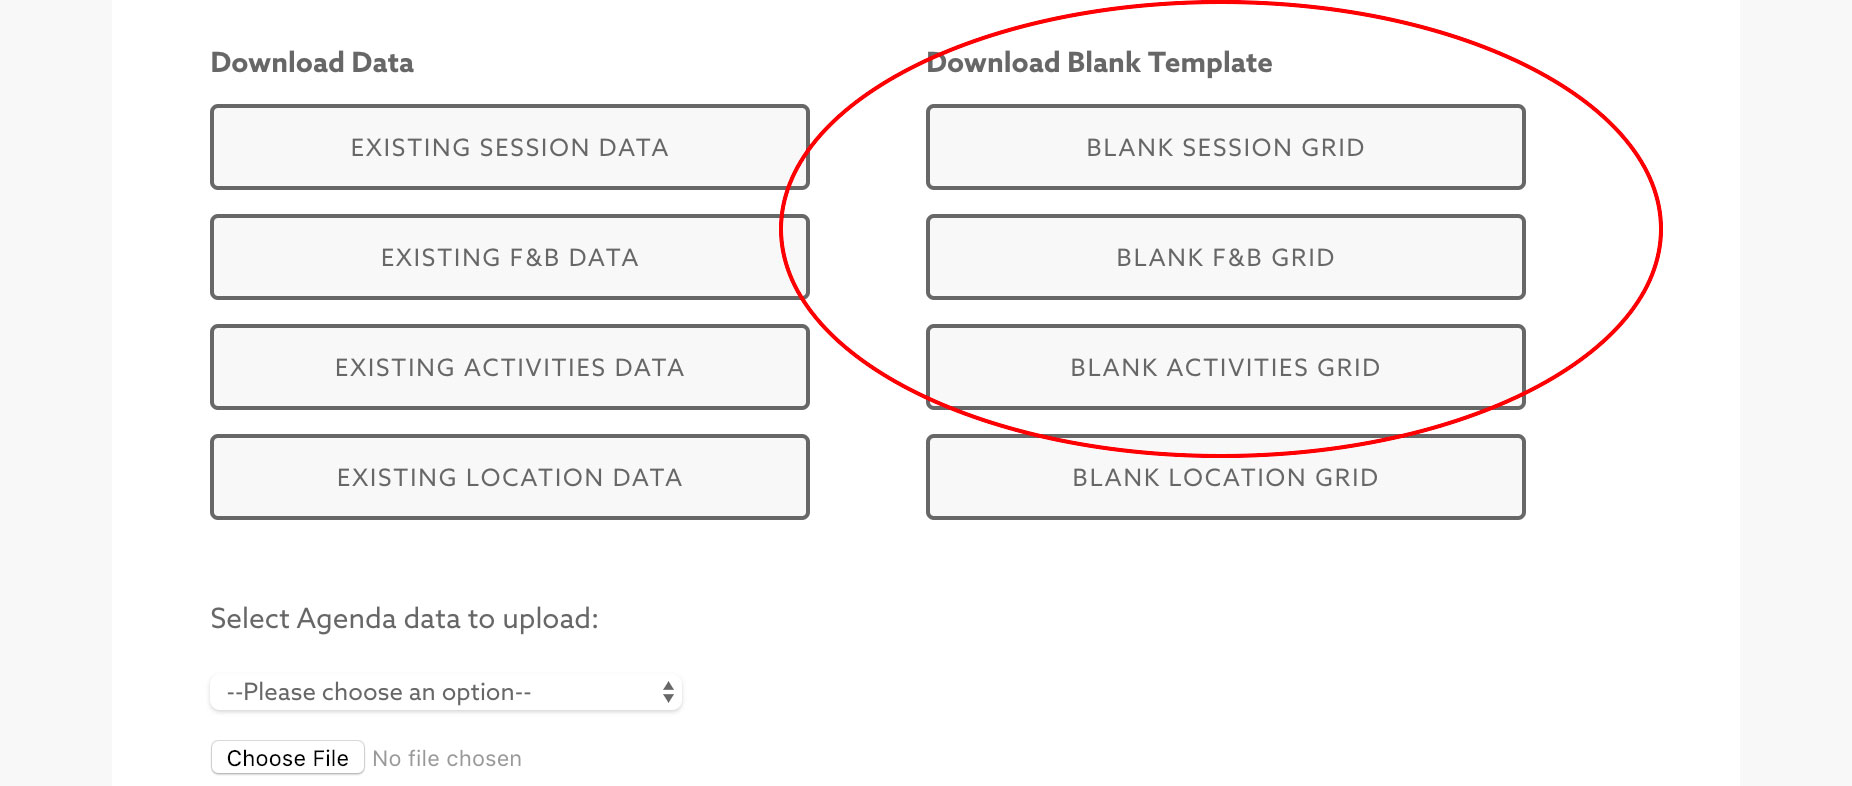 Blank templates available for download